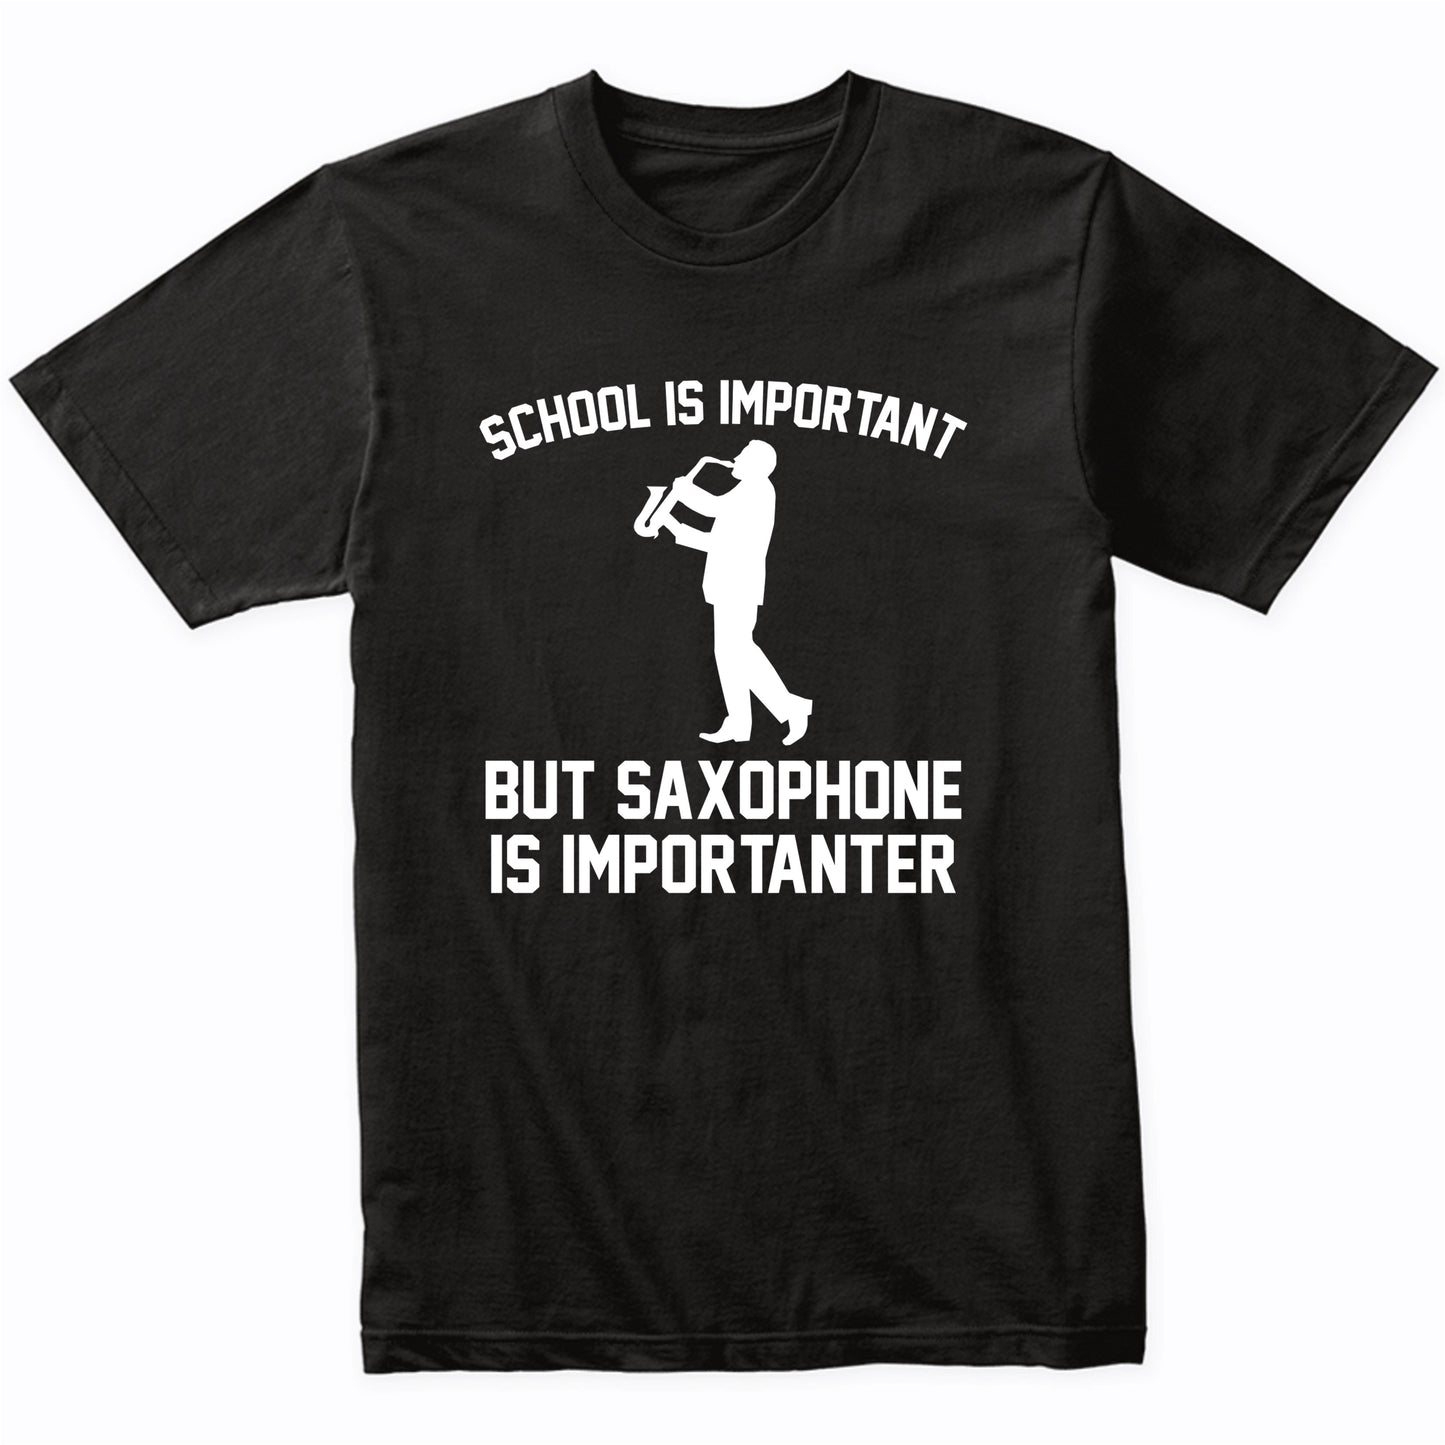 School Is Important But Saxophone Is Importanter Funny Shirt